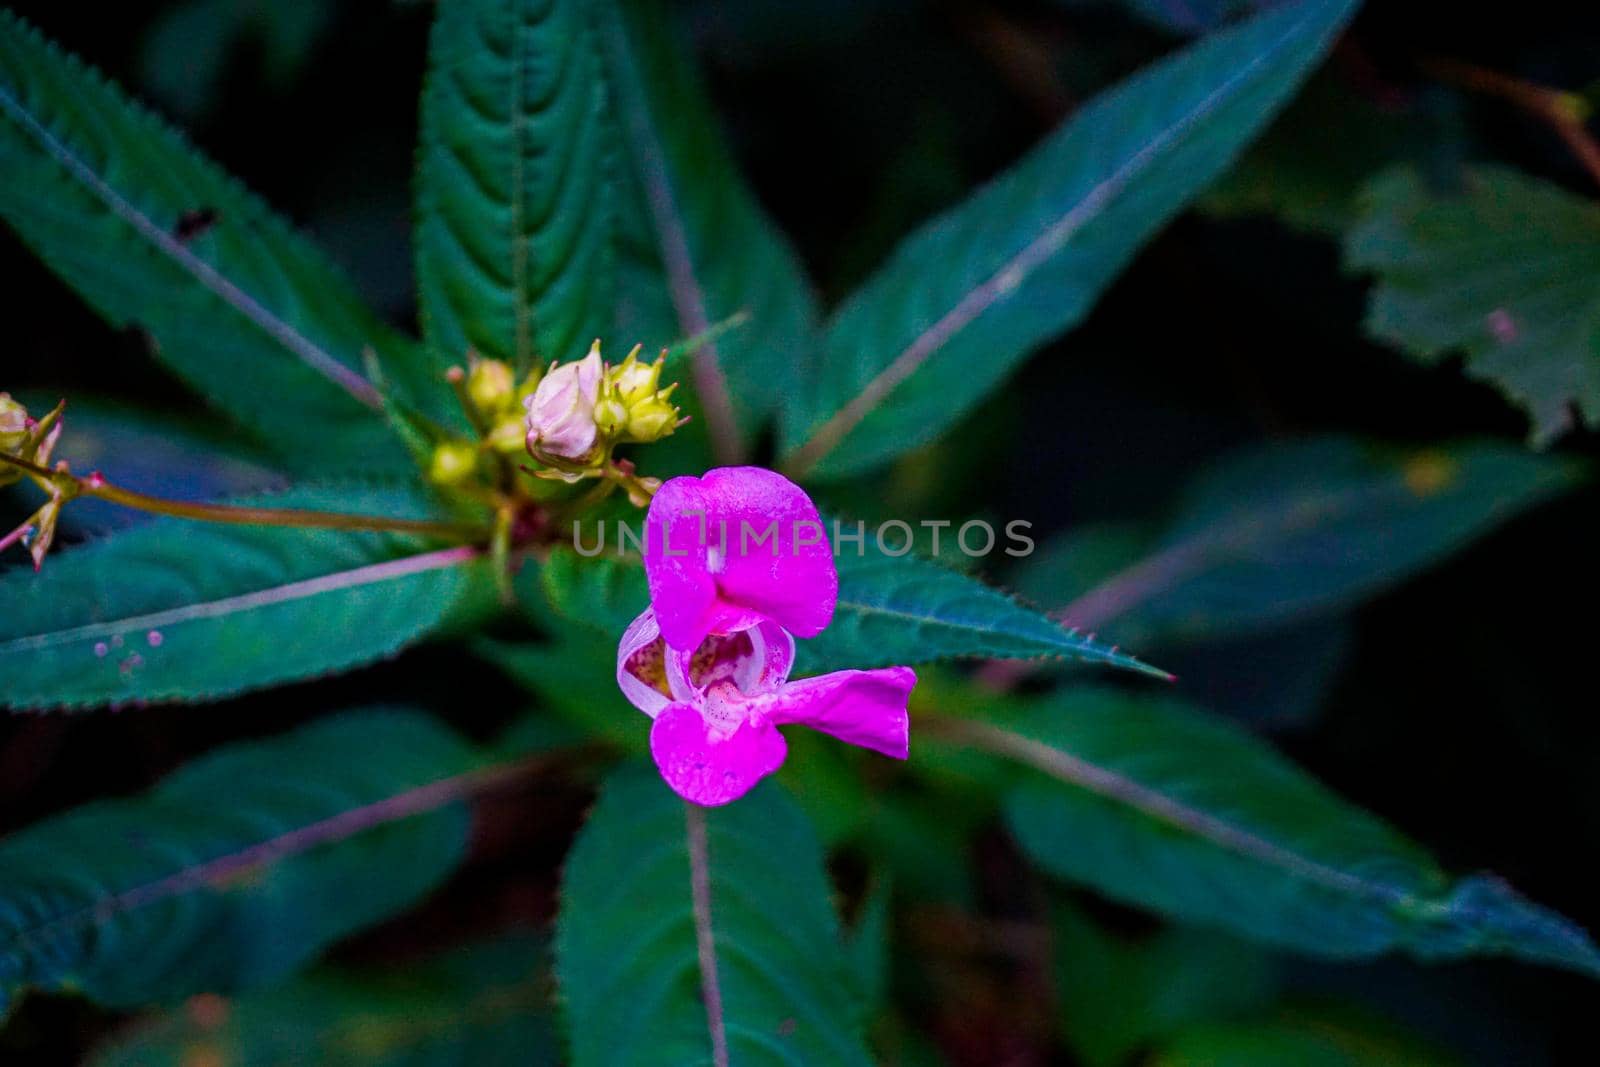 Impatiens glandulifera - also known as policeman's helmet by pisces2386